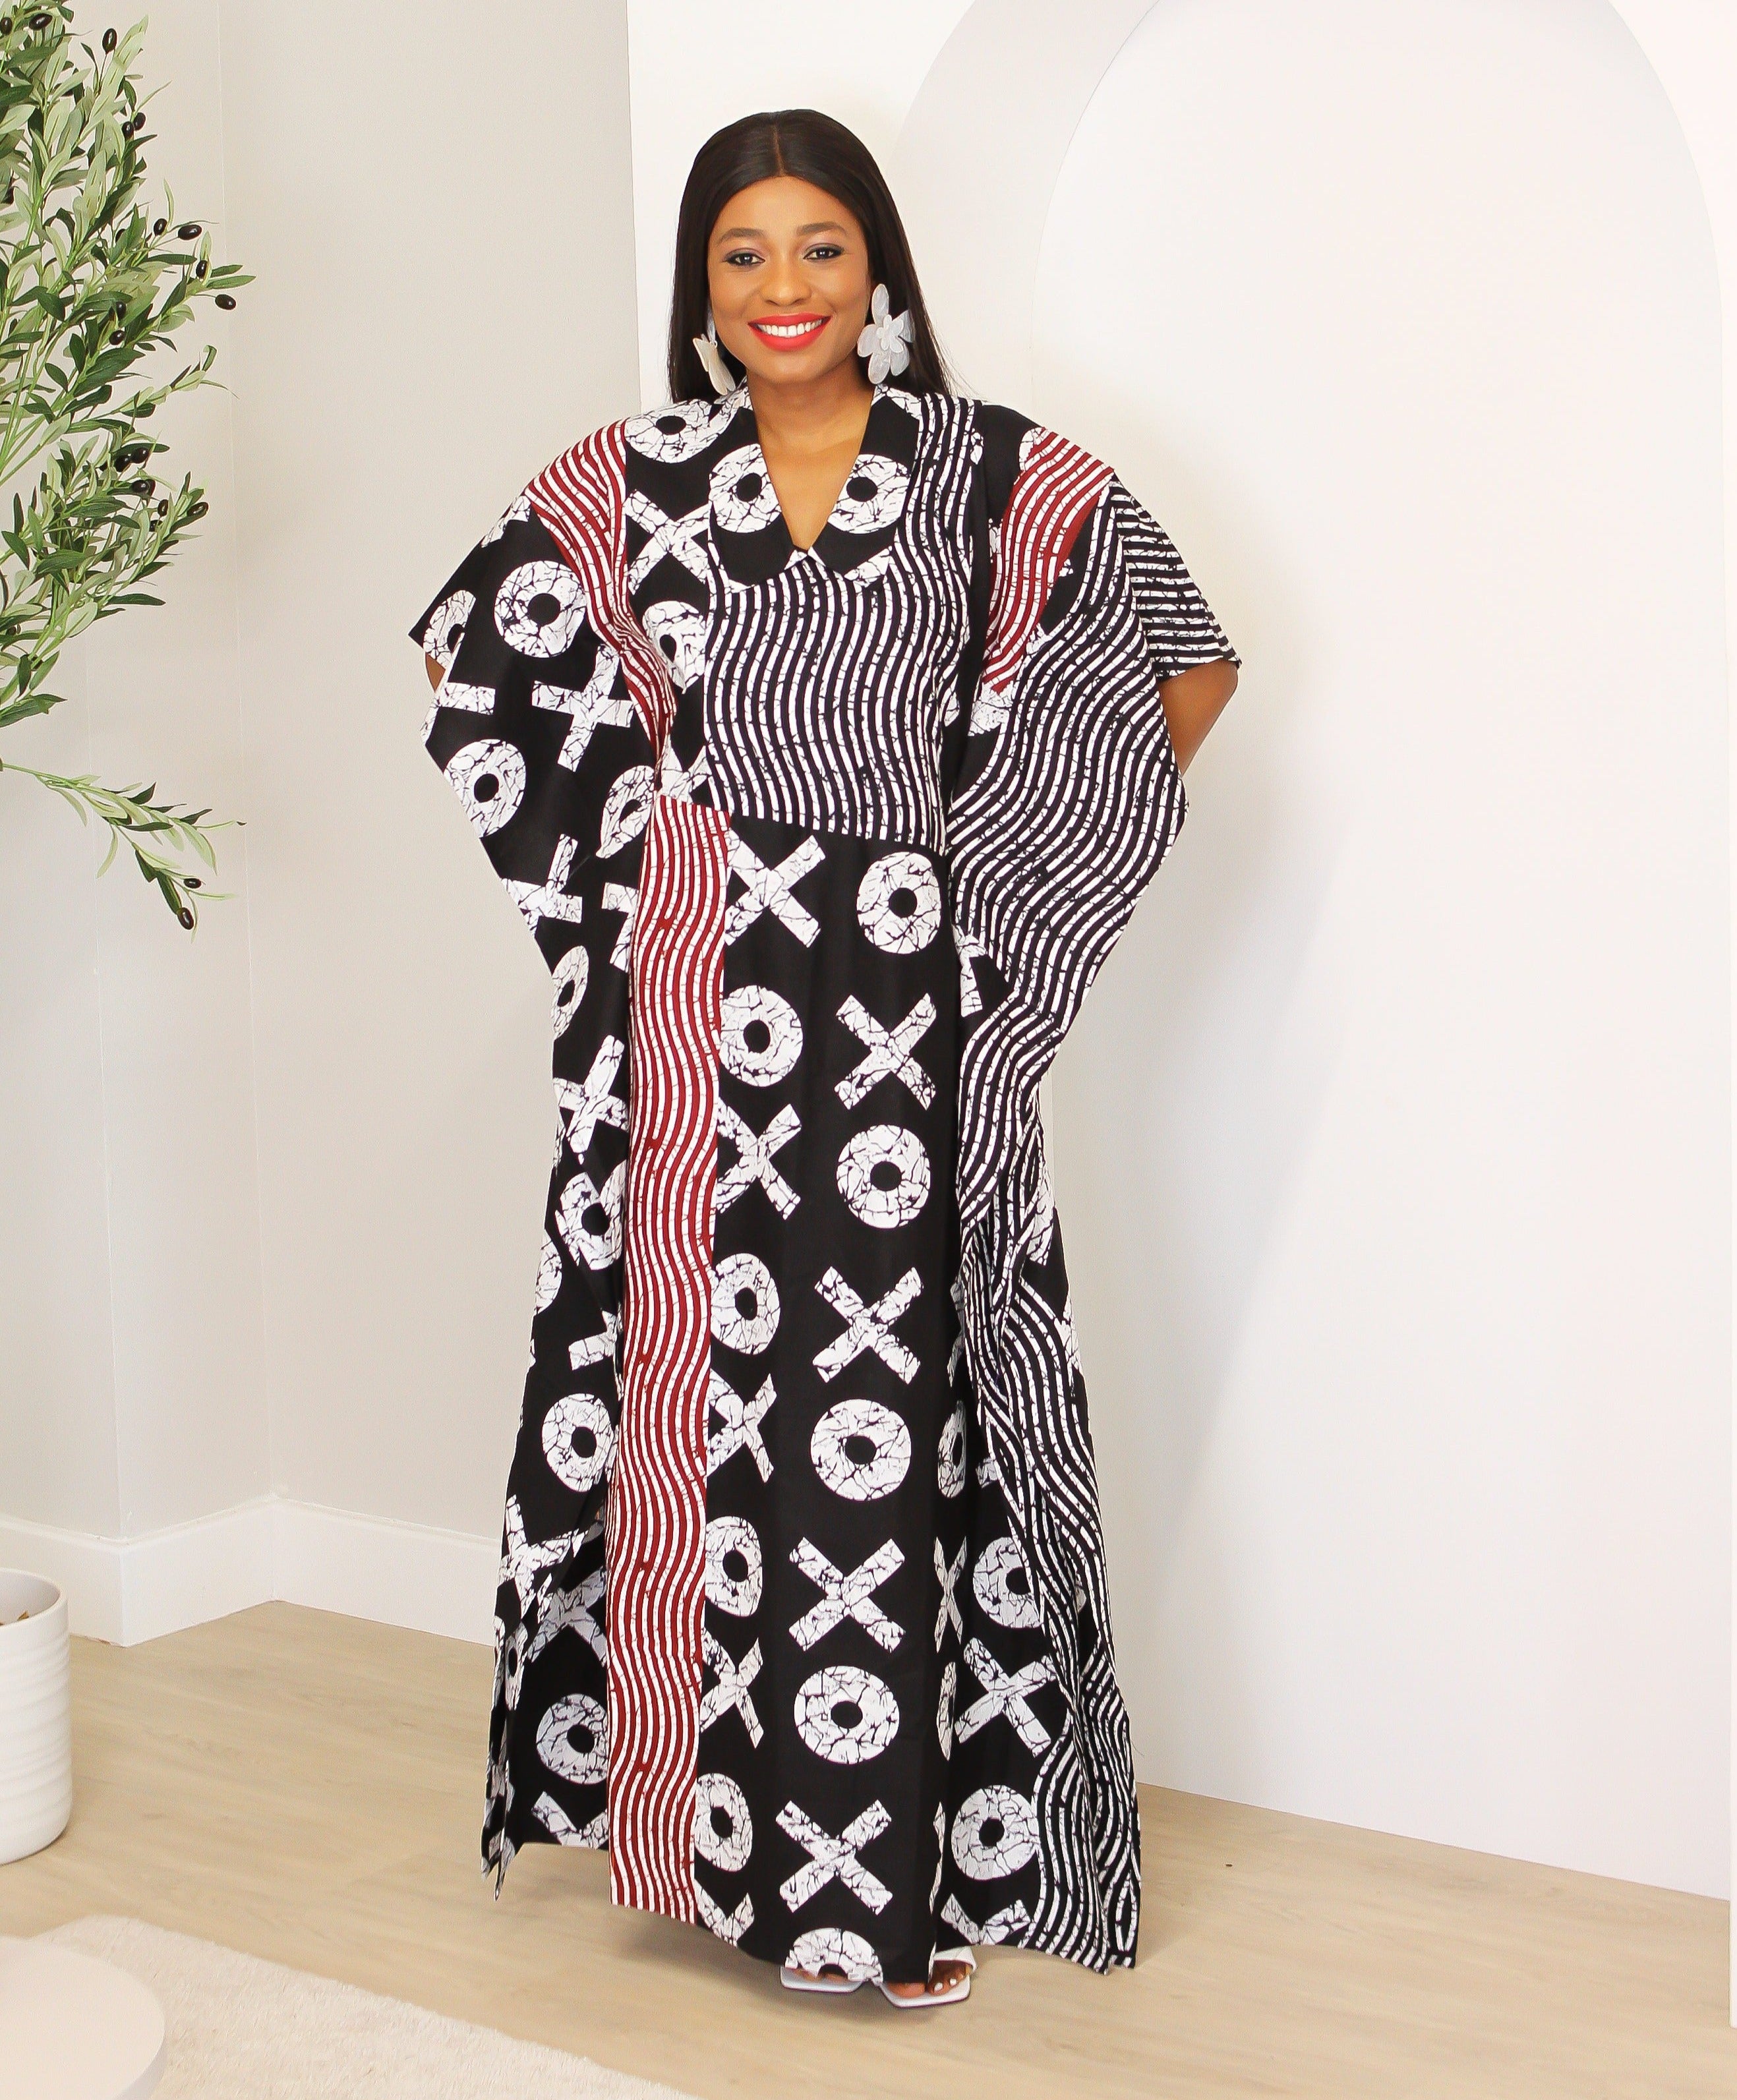 THE DRESSING GOWN in SUNSET AWNING STRIPED GAUZE – Lisa Marie Fernandez